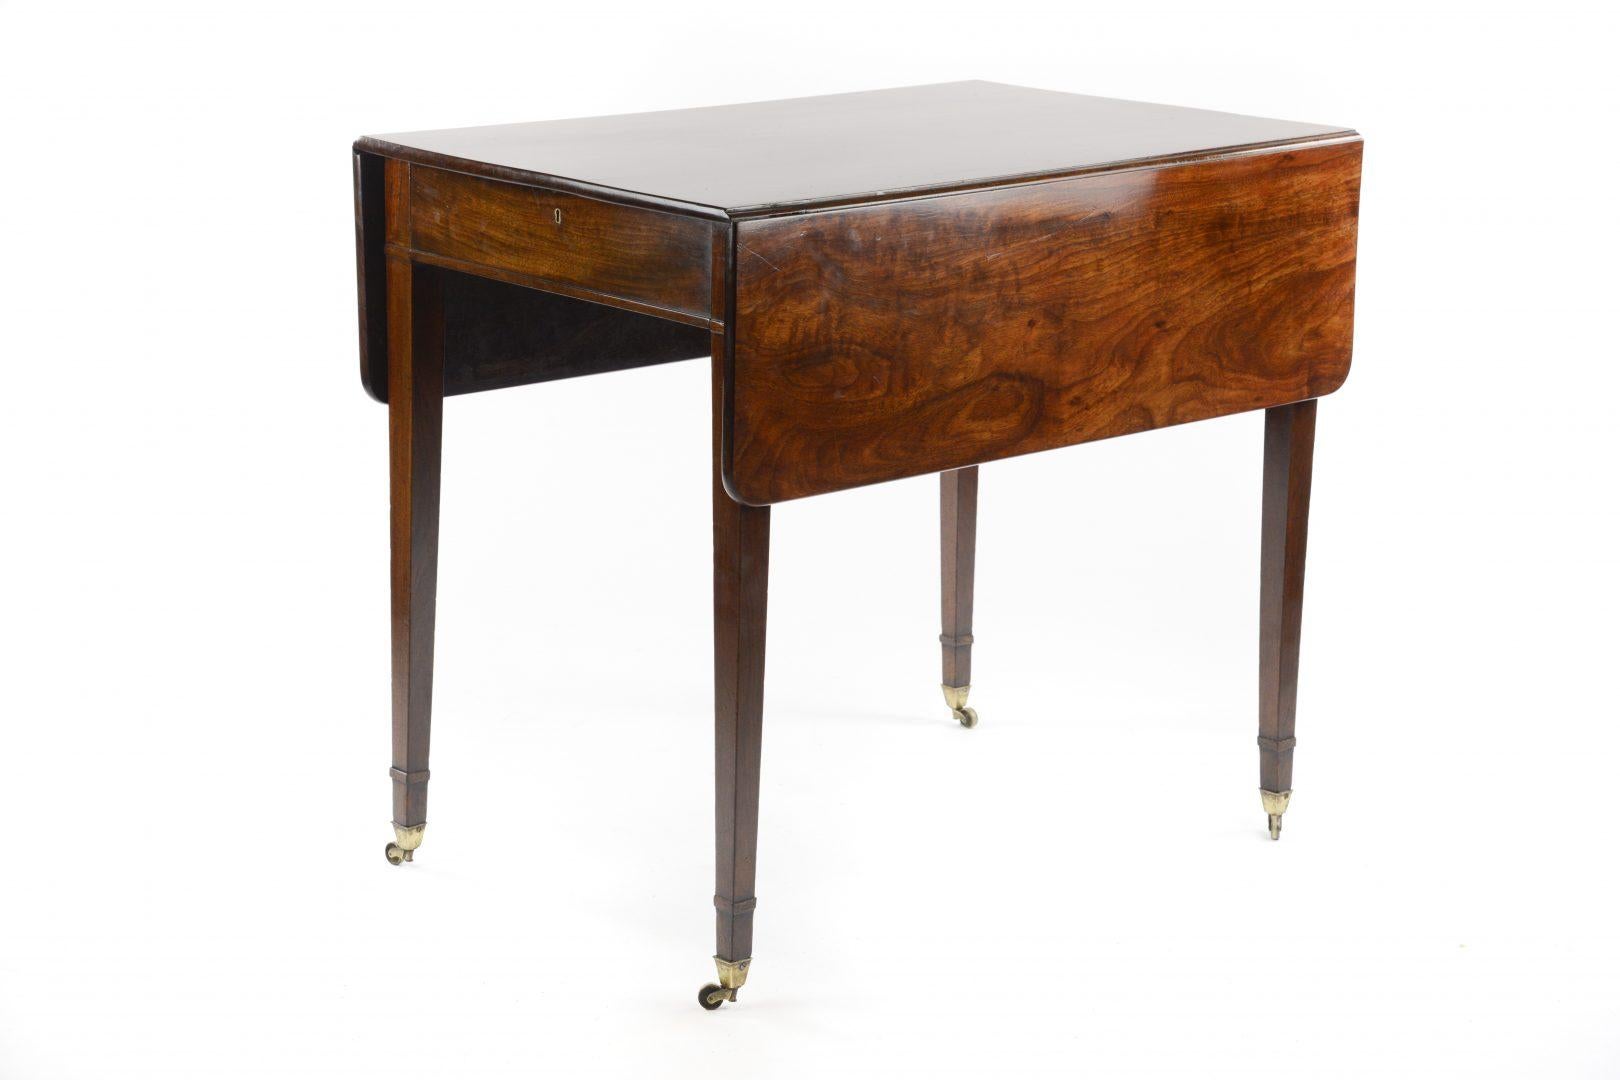 19th Century George IV Mahogany Pembroke Table by Gillows